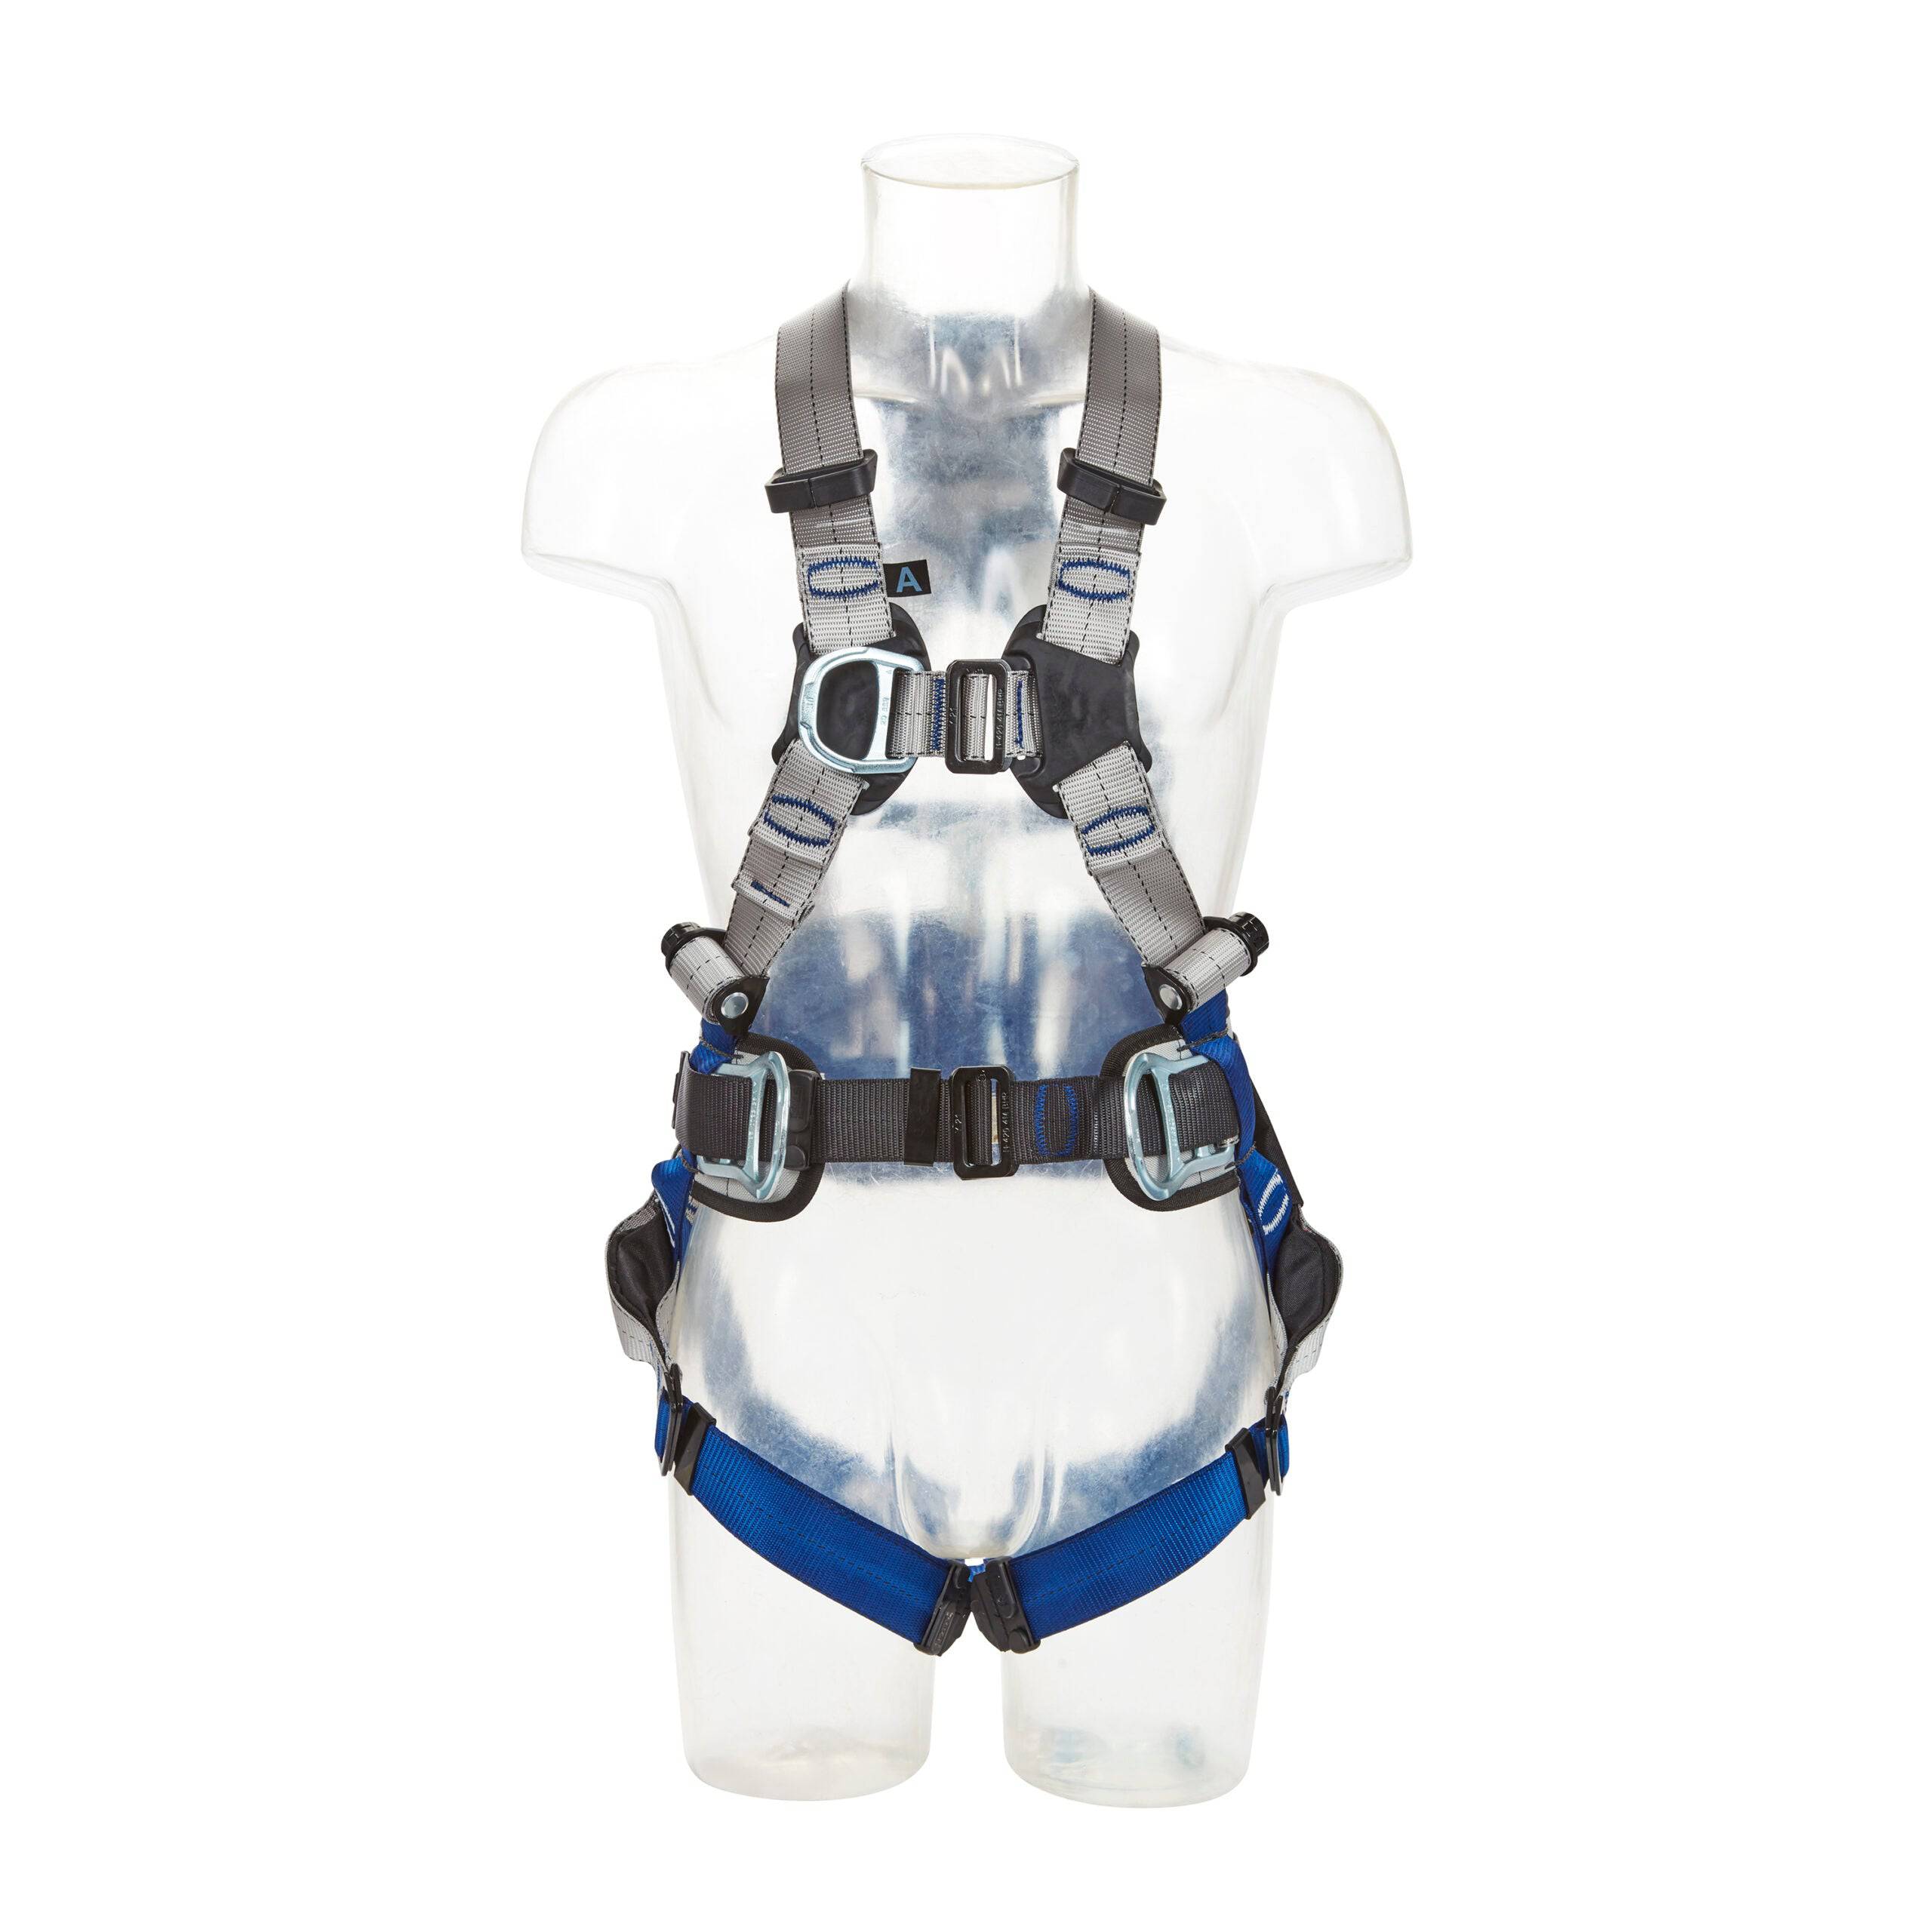 3M DBI SALA ExoFit XE50 Positioning Safety Harness - SecureHeights